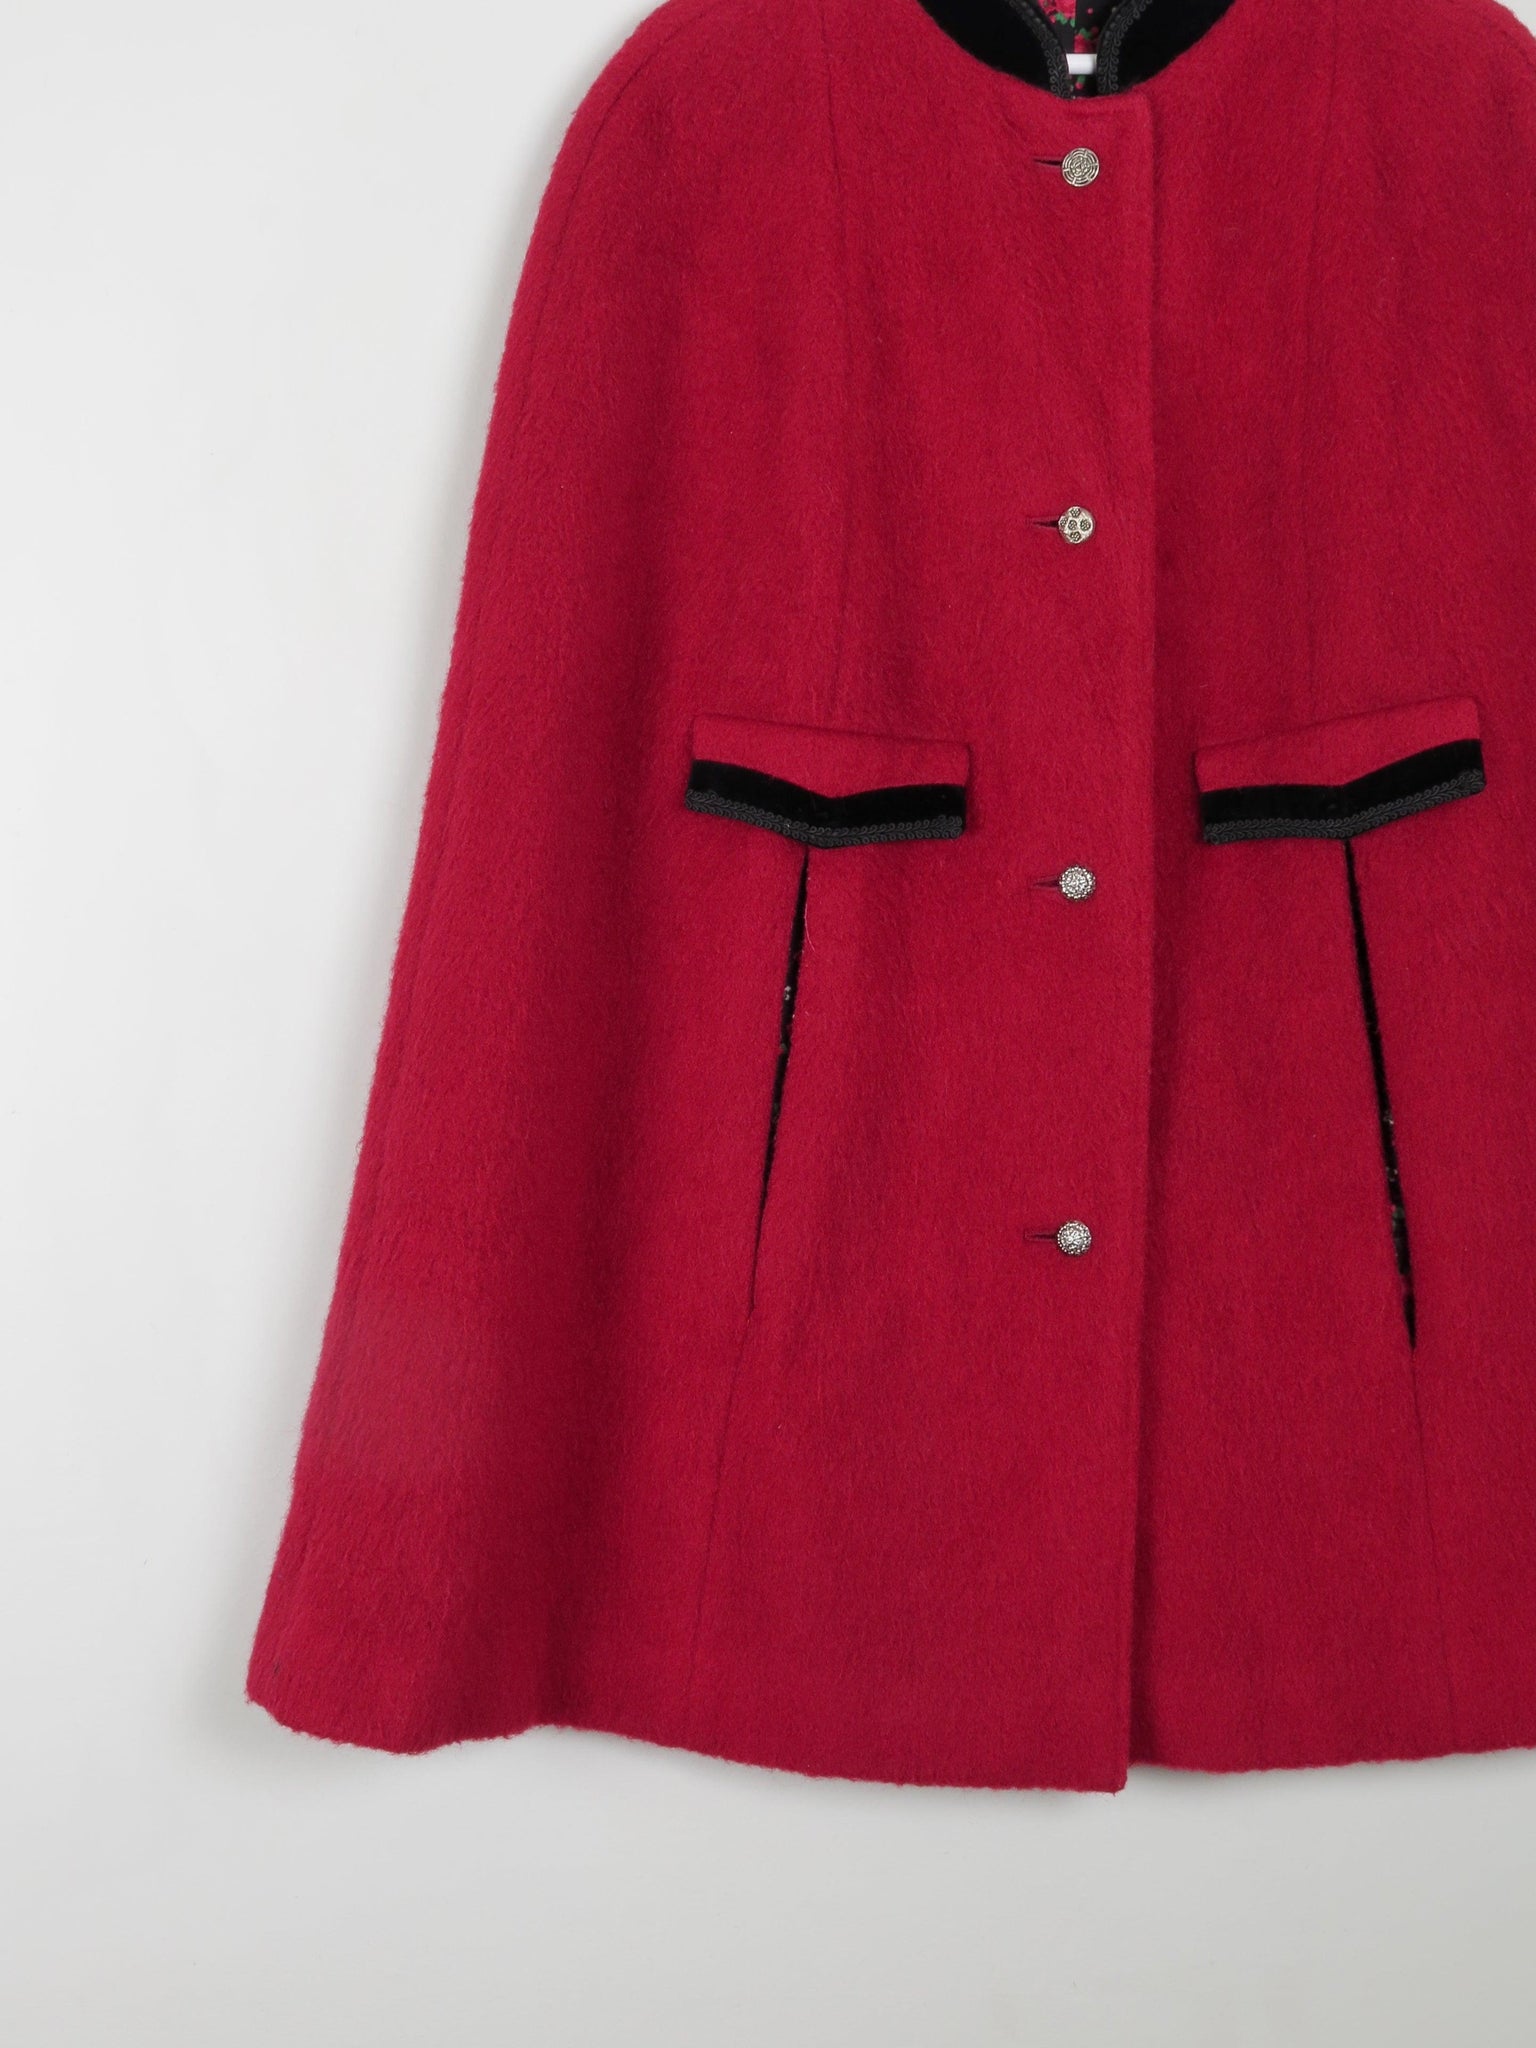 Women's Wool Cherry Red Vintage Cape M/L - The Harlequin